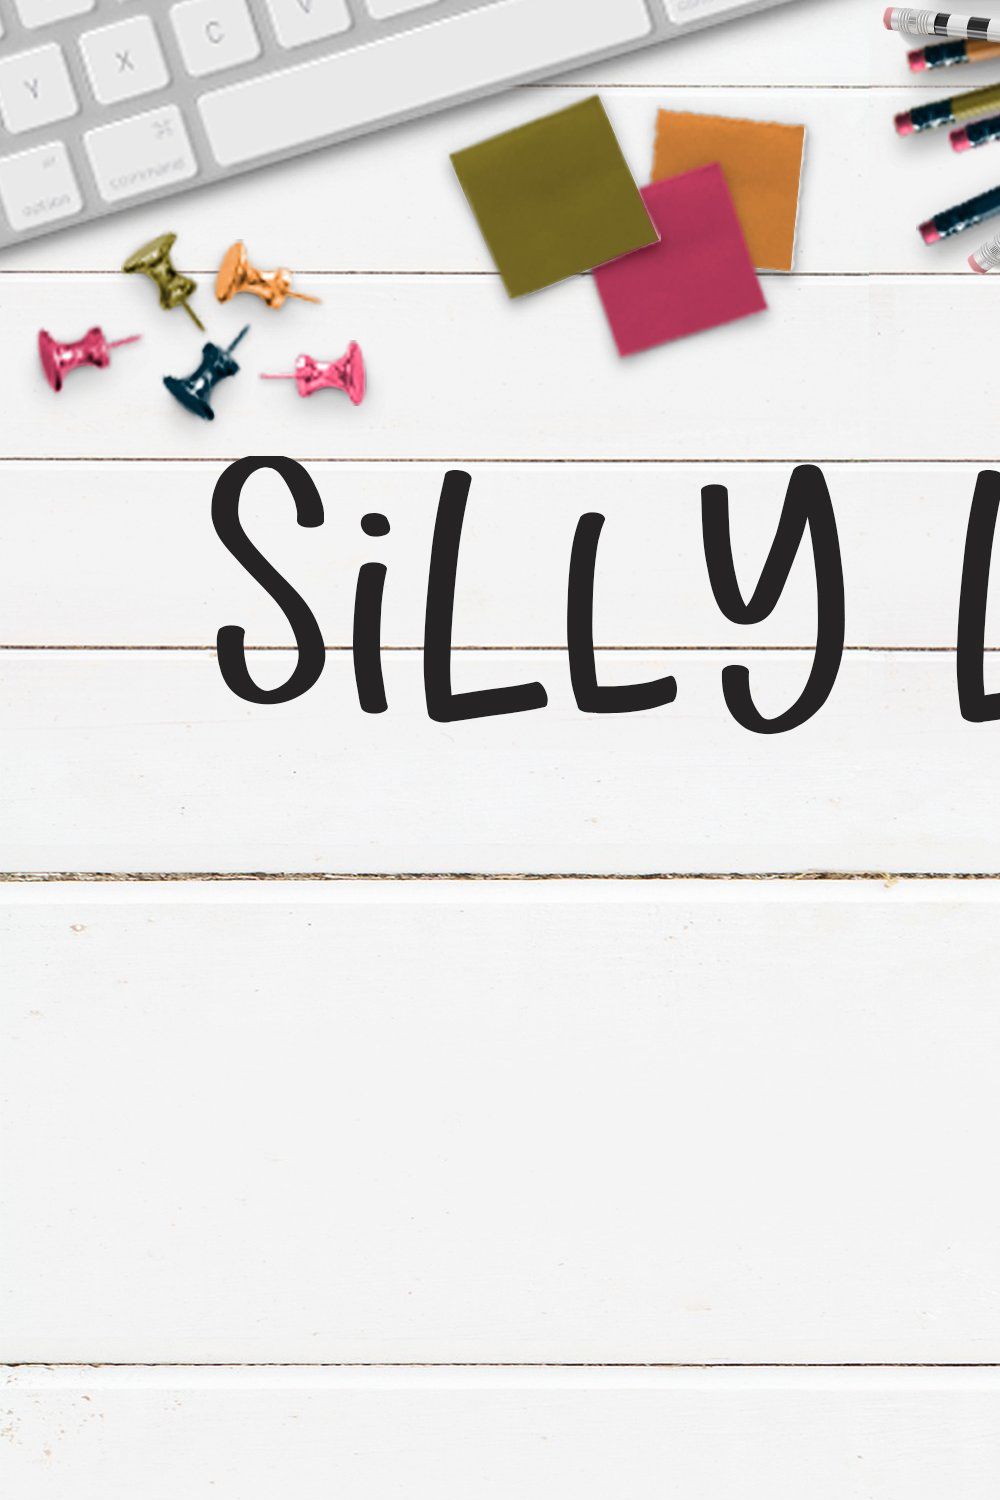 Silly Lillie:A fun handlettered font pinterest preview image.